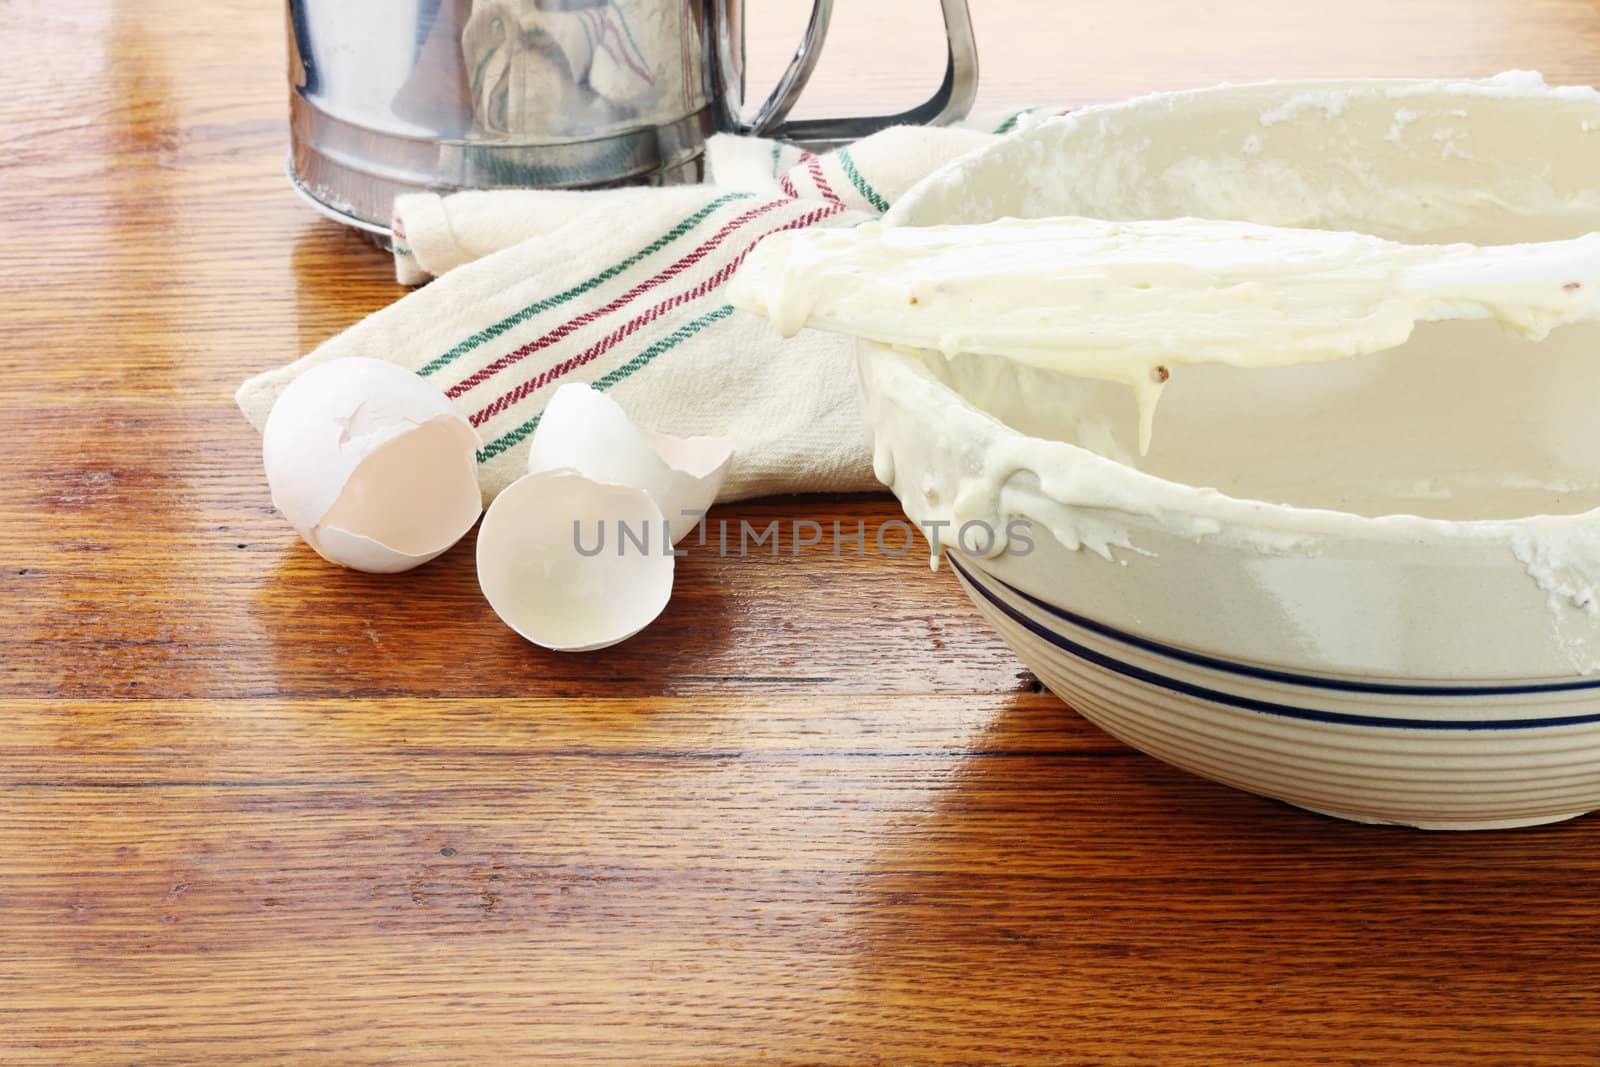 Old fashion mixing bowl with cake batter or pancake batter sitting on a rustic wooden table.